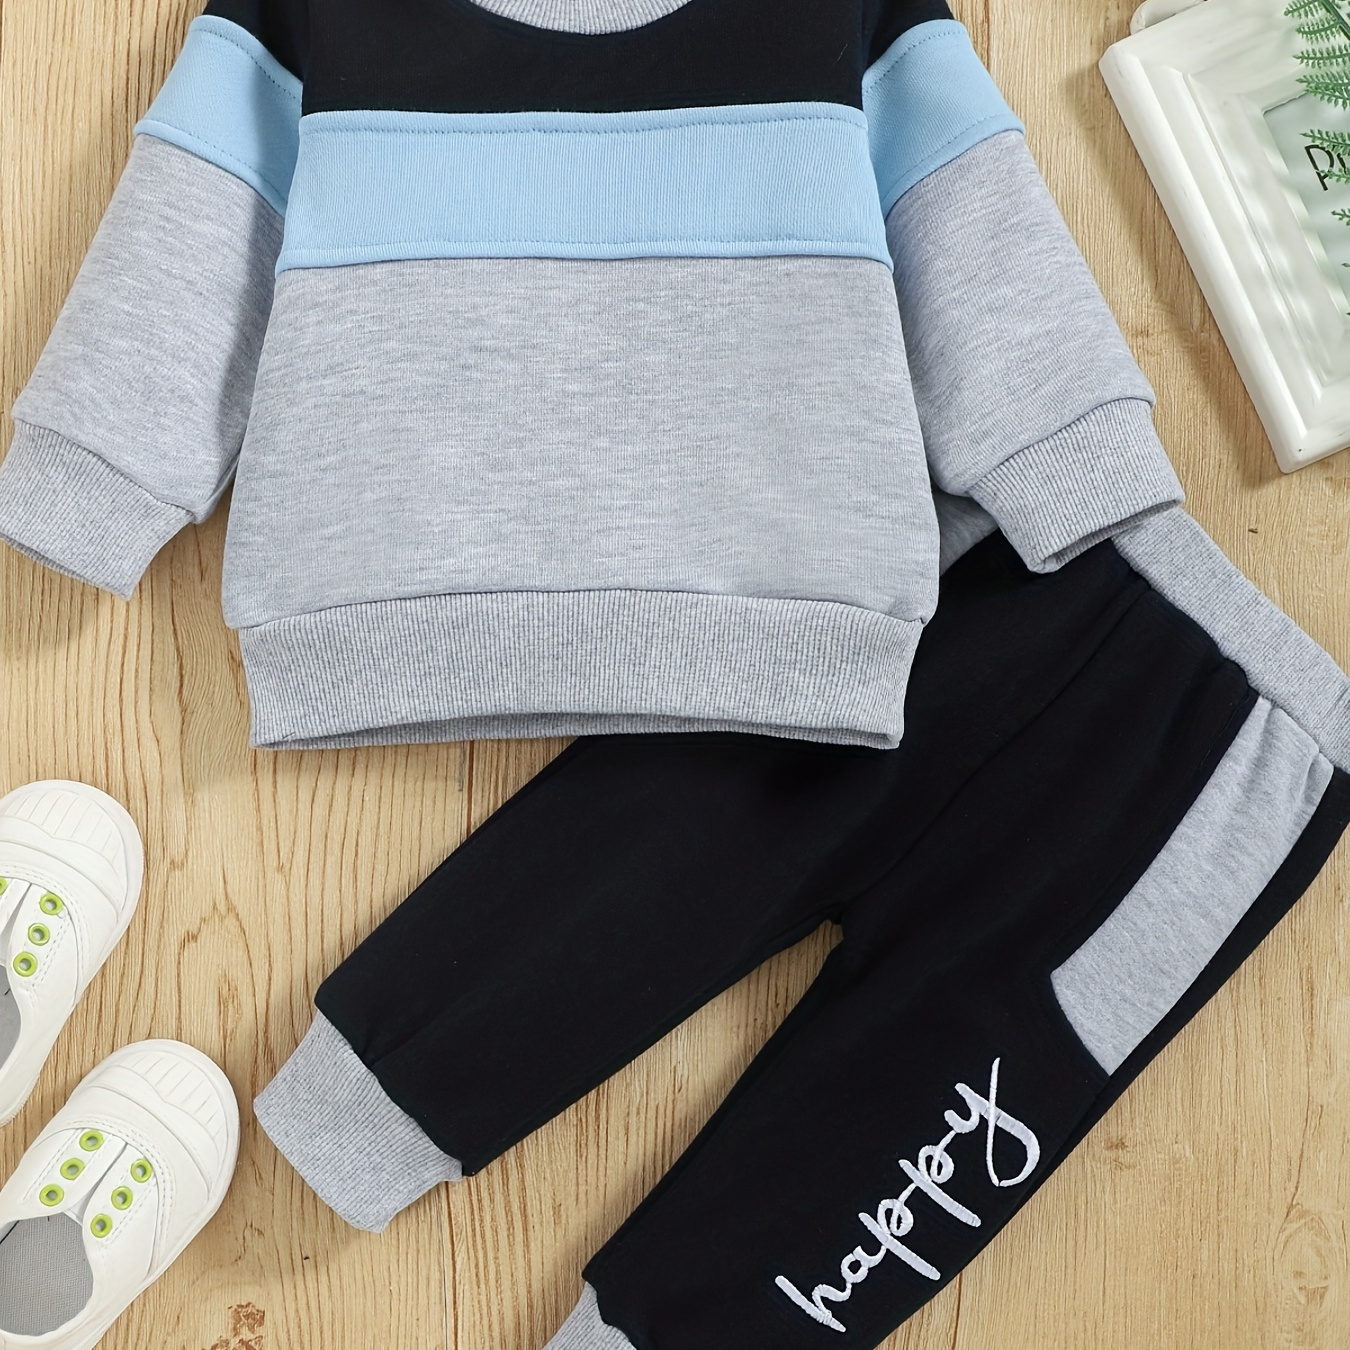 

Baby Boy Casual Cotton 2pcs Outfits Winter Fall Sweatshirt Pants Set For Kids 3 Months-24 Months